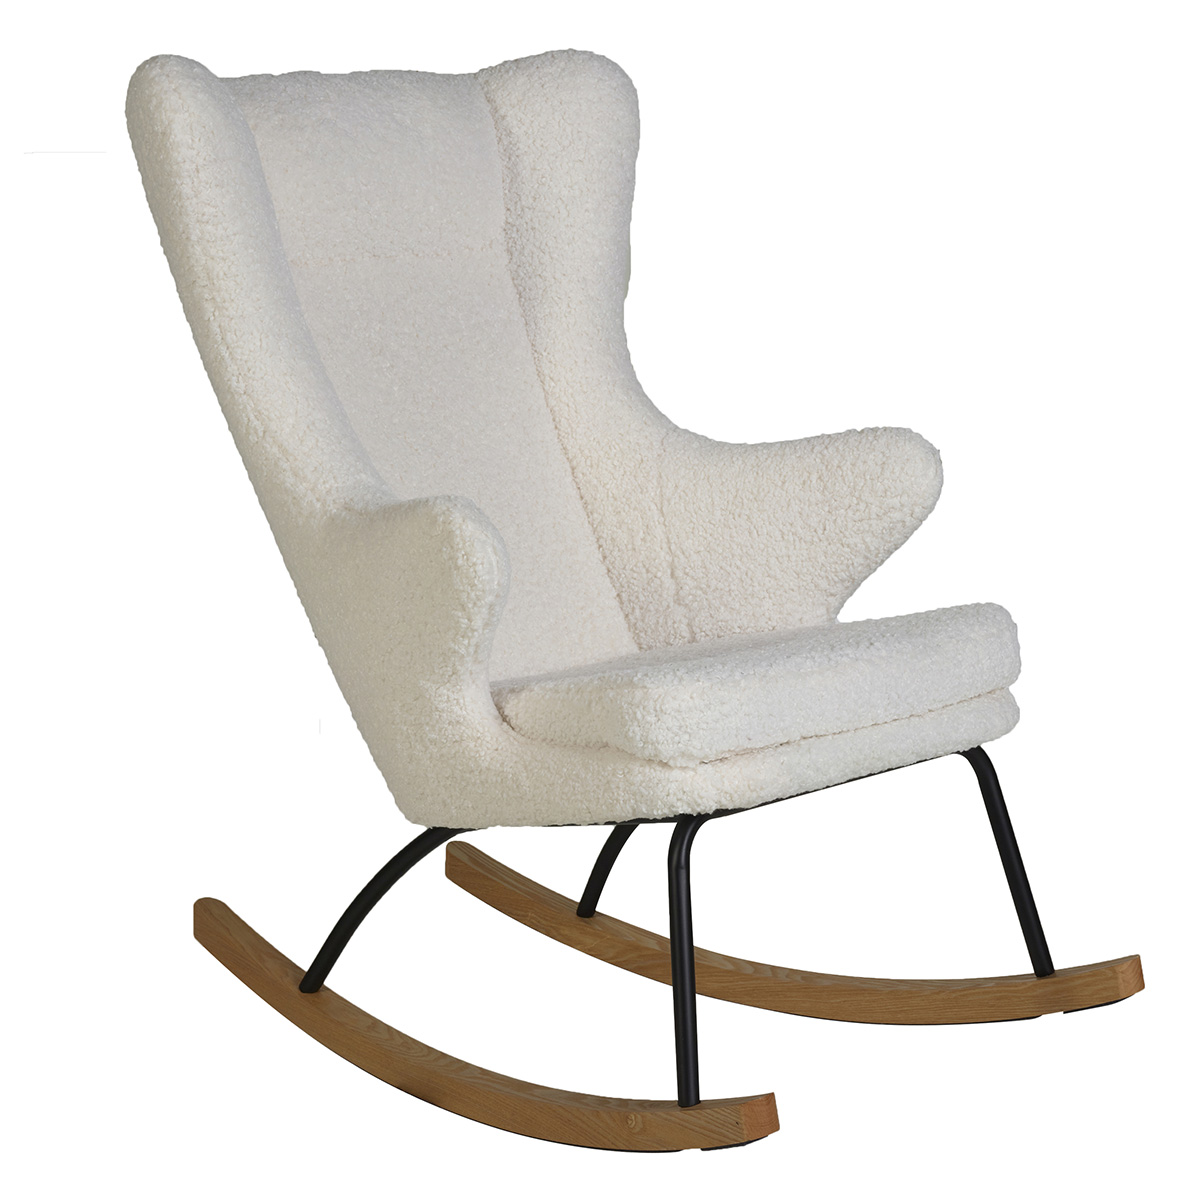 Fauteuil Rocking Adult Chair De Luxe - Limited Edition Rocking Adult Chair De Luxe - Limited Edition